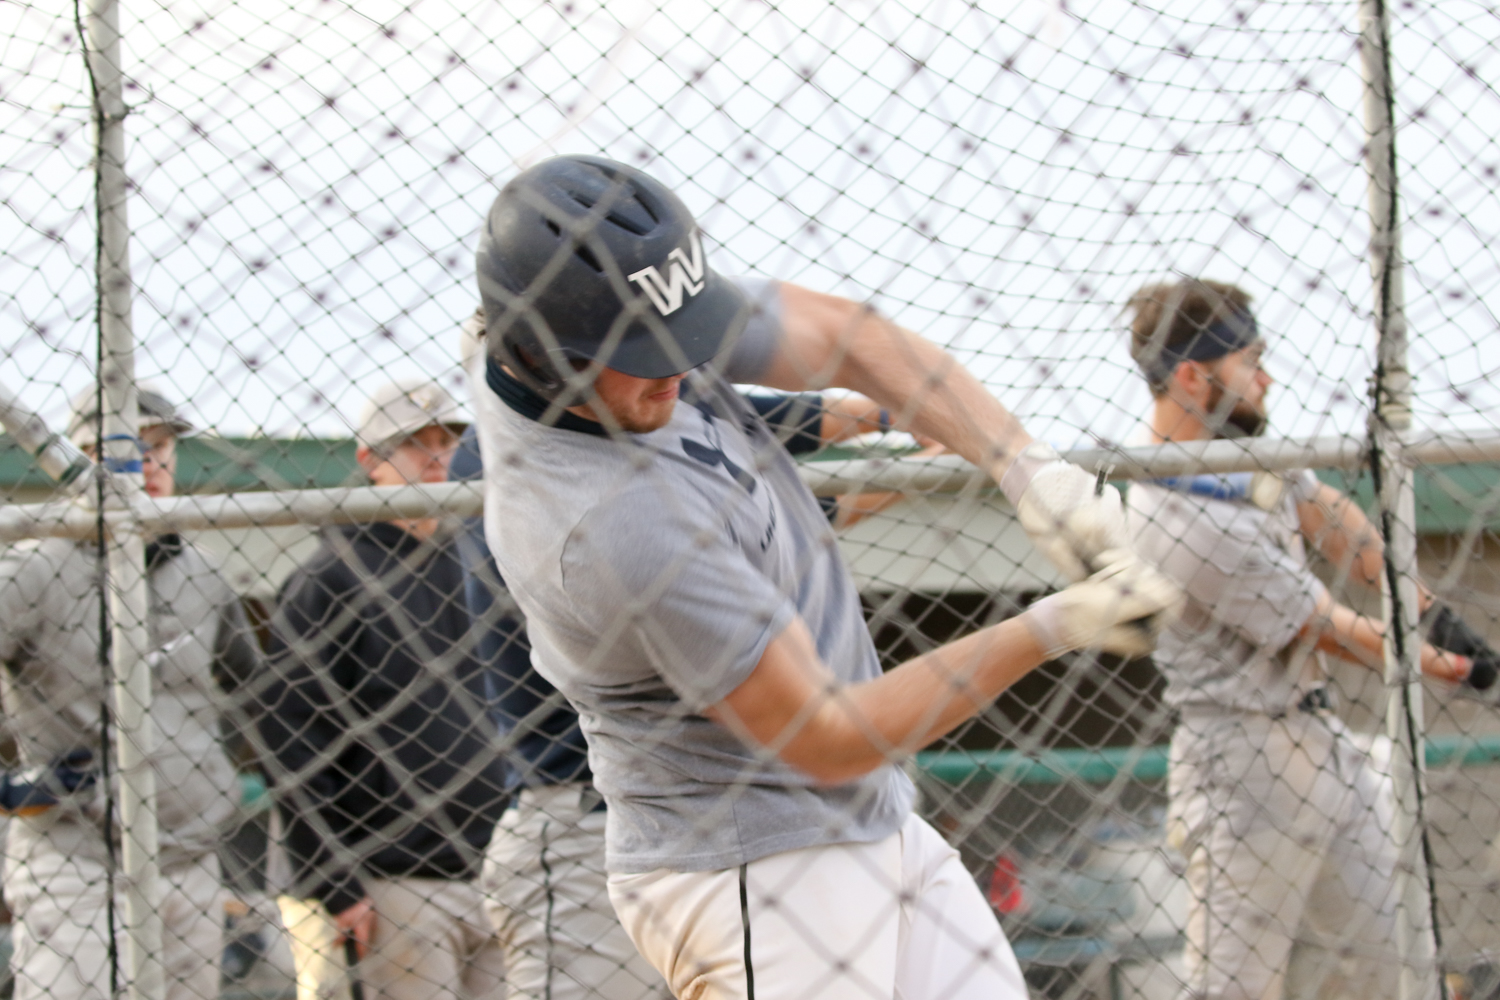 WNCC baseball ready to open the season this weekend